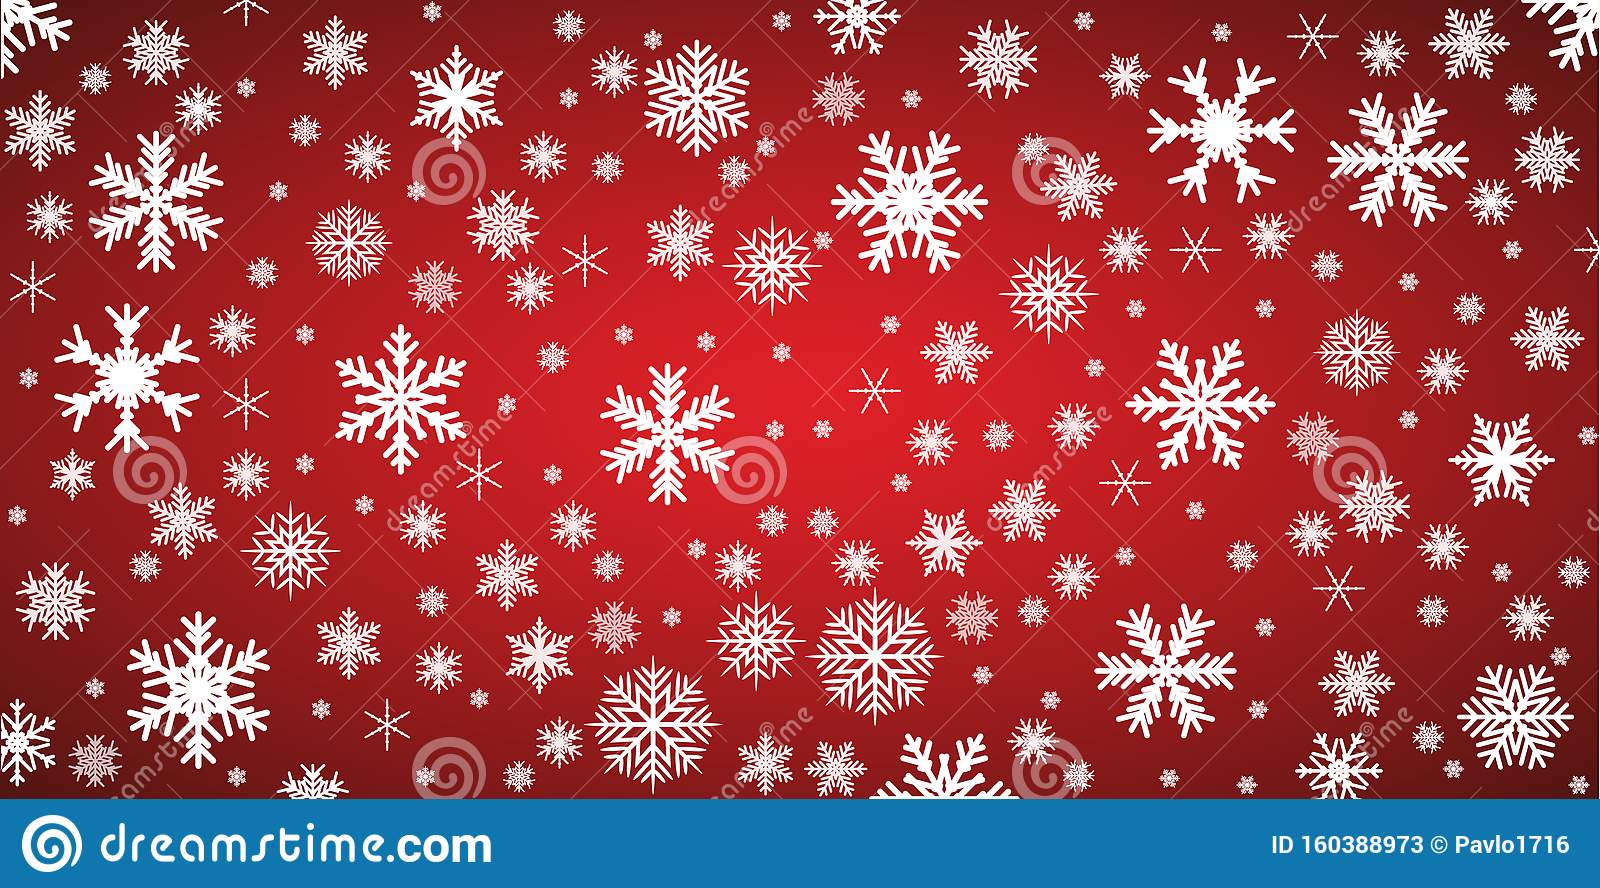 Red snowflake background with transparent snowflakes